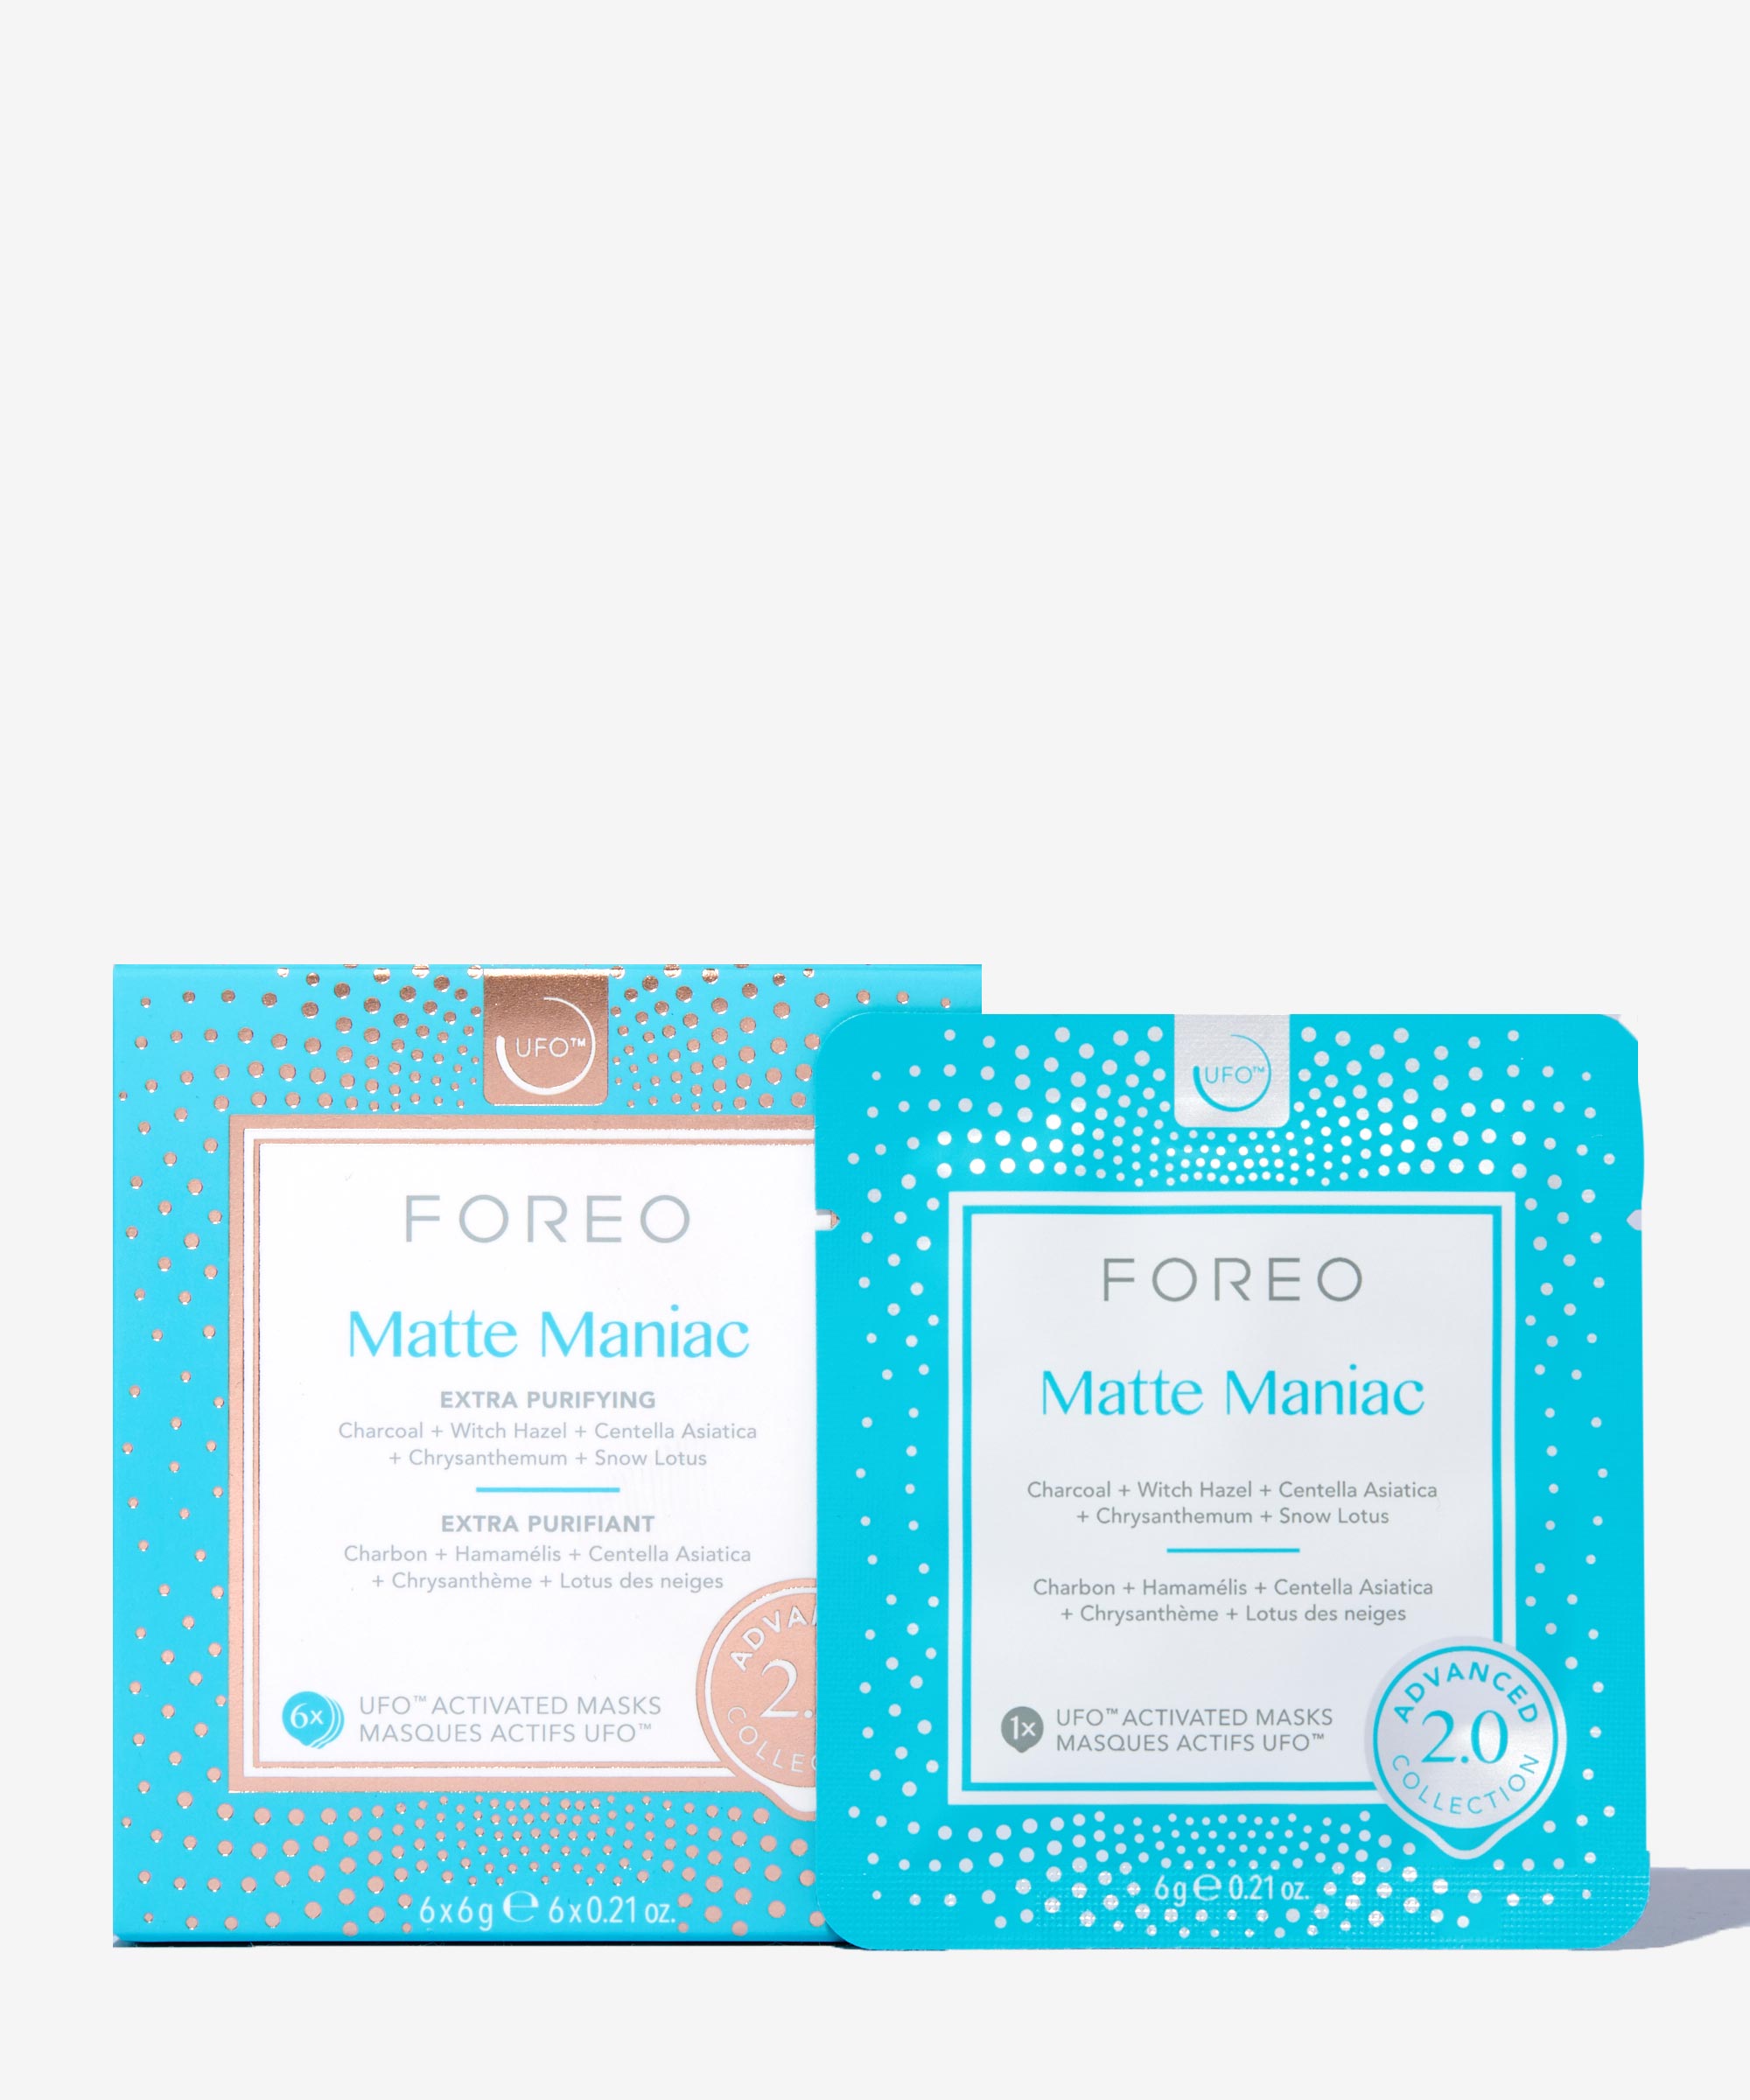 Foreo Matte Maniac 2.0 UFO-Activated Purifying Mask at BEAUTY BAY